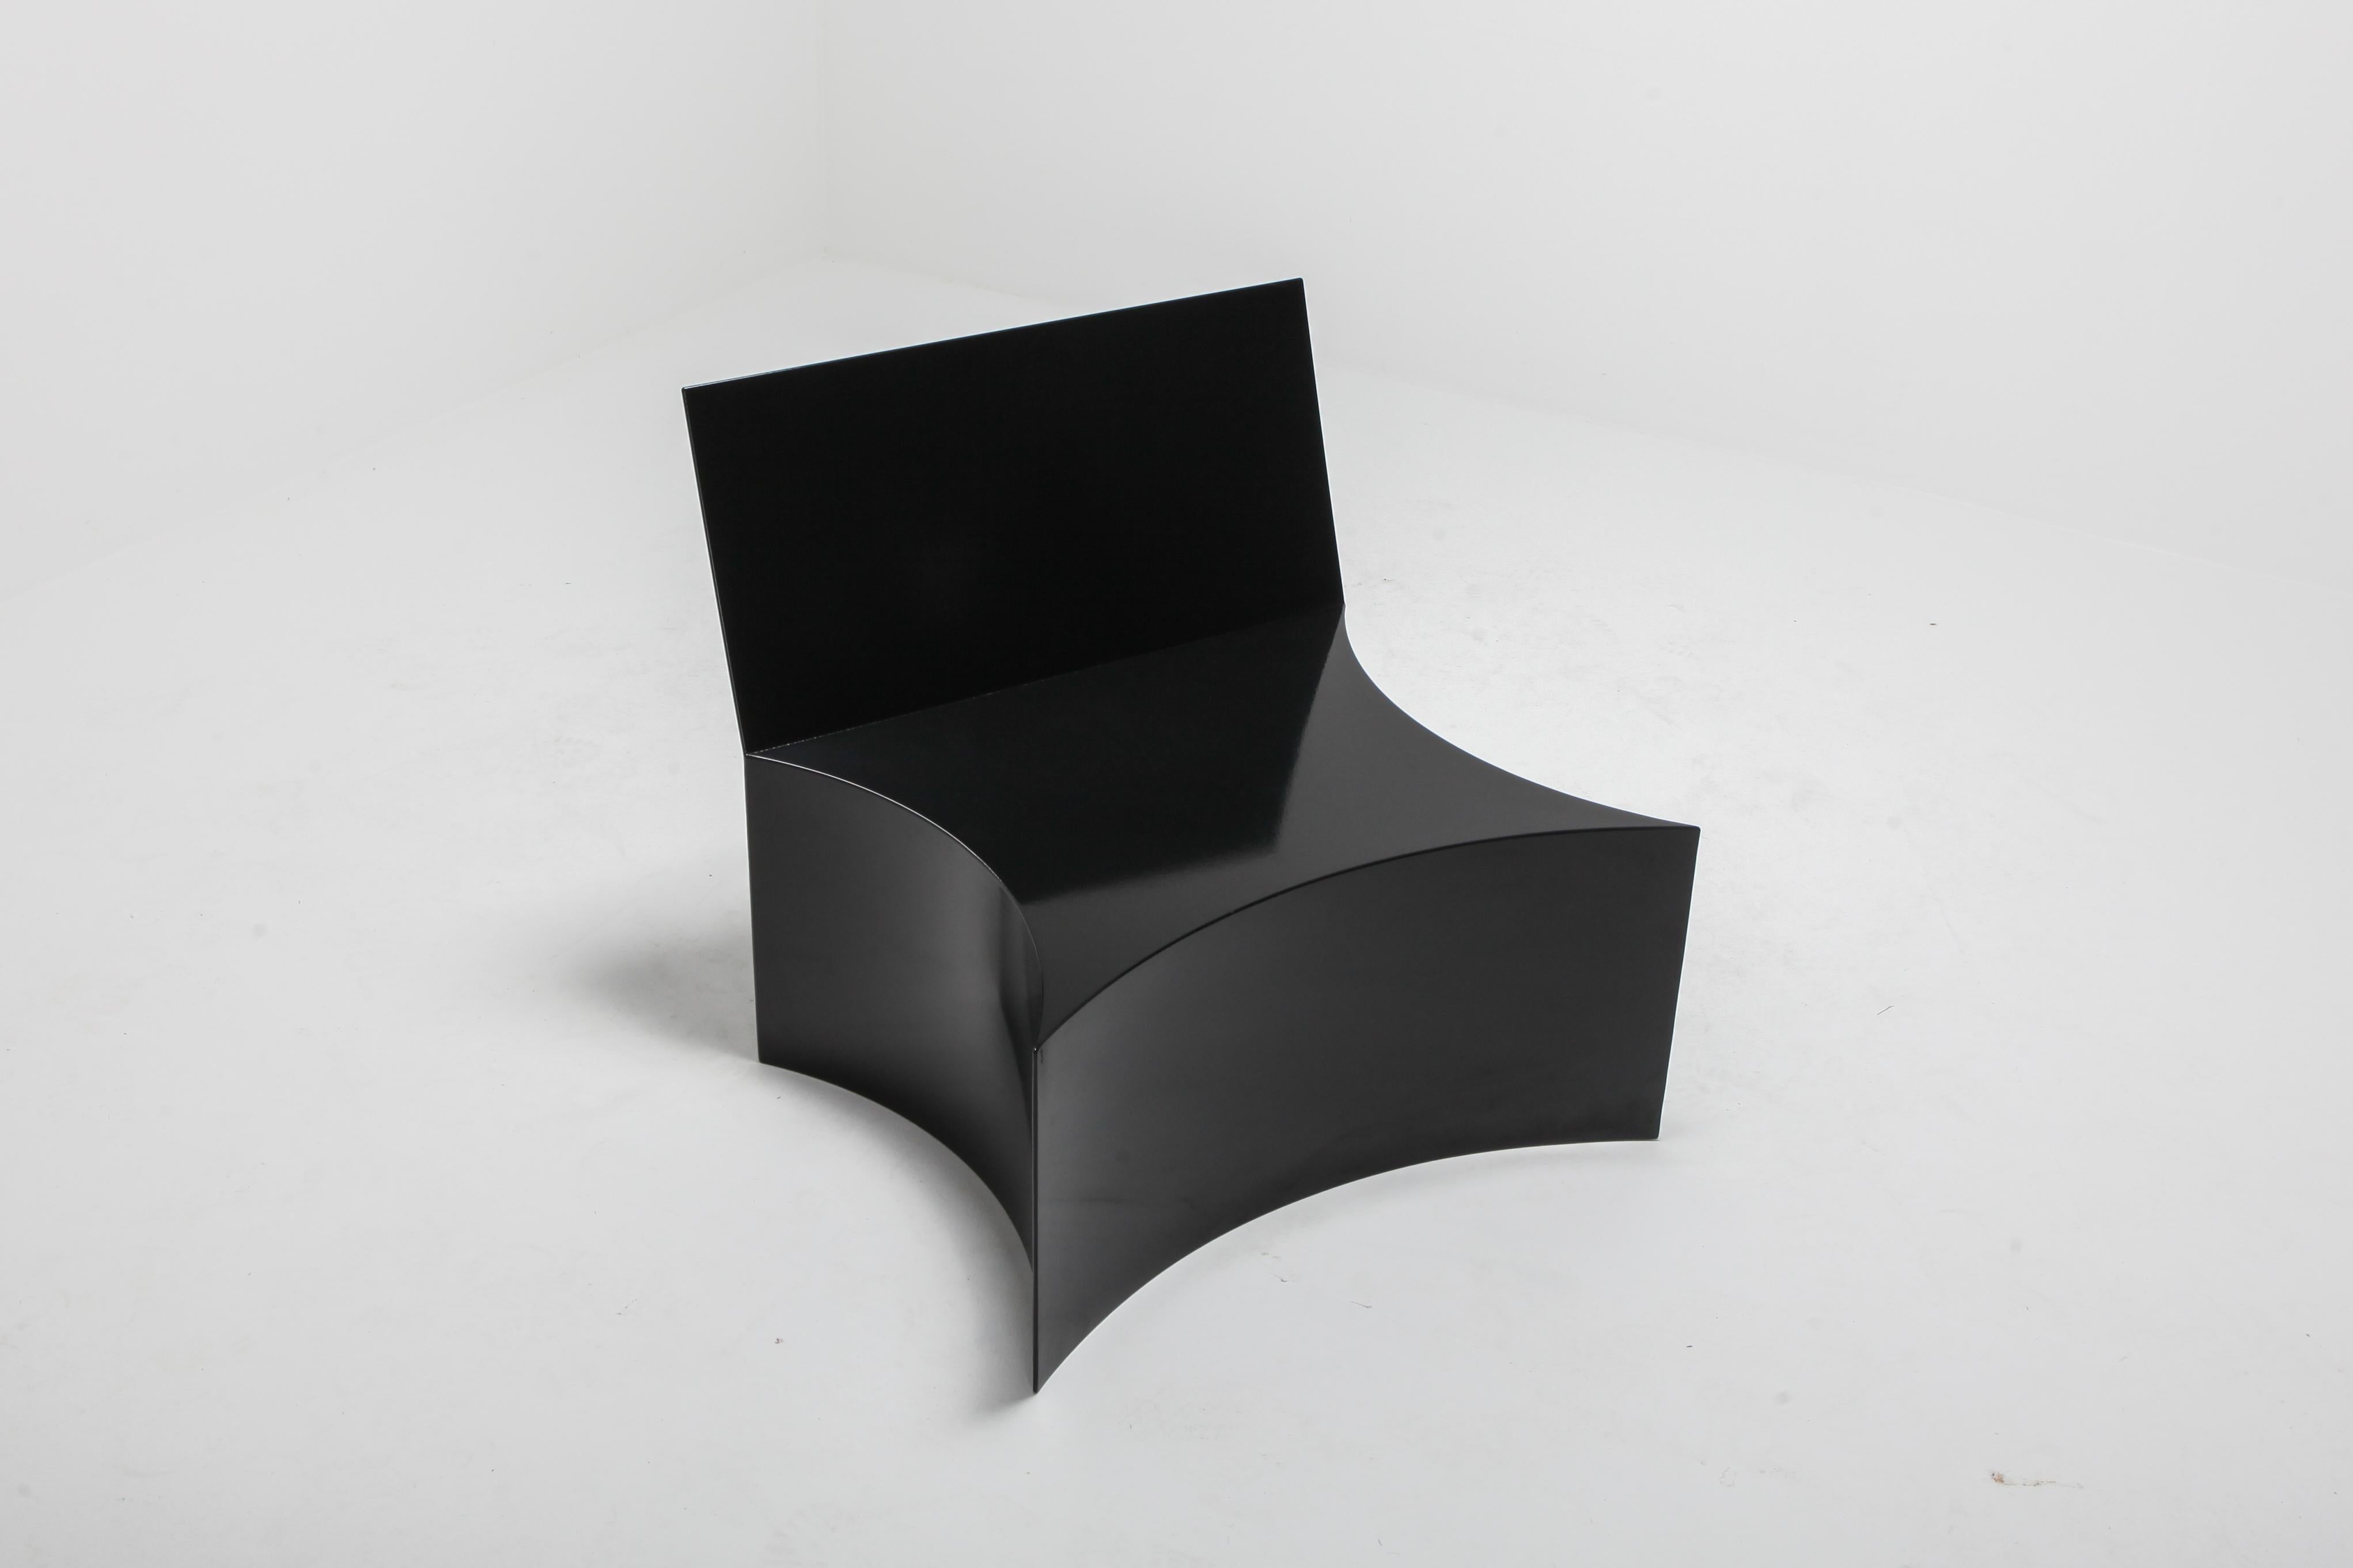 Functional art piece or Collectible Design by Belgian contemporary artist Benny Van Den Meulengracht Vrancx 2019.
welded steel, power coated.

Currently on view at Everyday Gallery's In Real Life exhibition.

The story of Chair begins with an